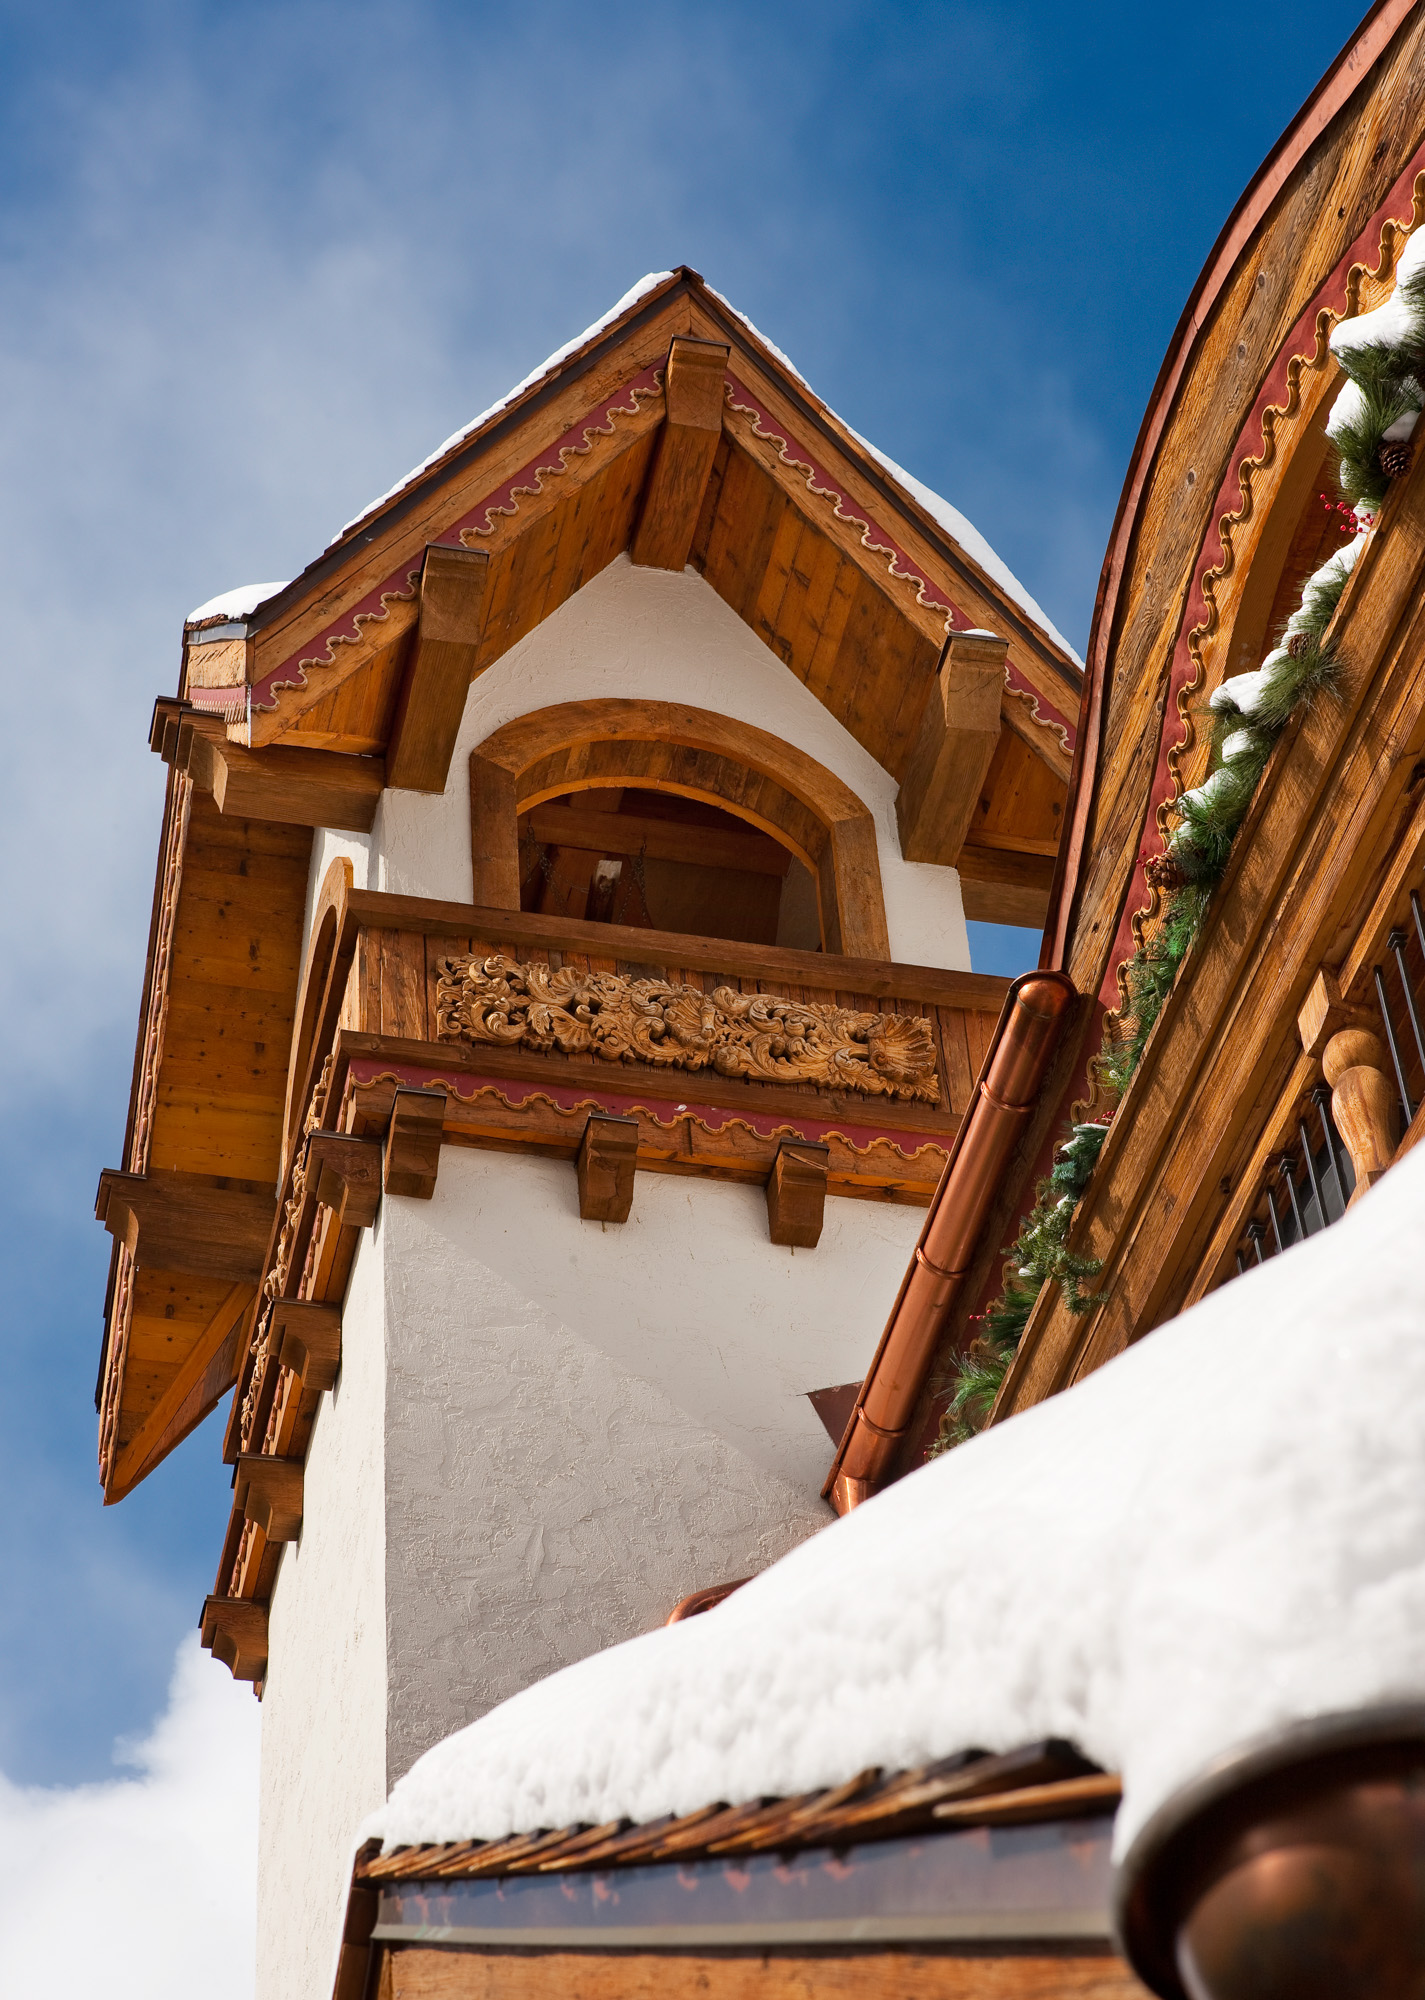 a close up exterior view of the tower in the Bell Tower project in Vail, CO